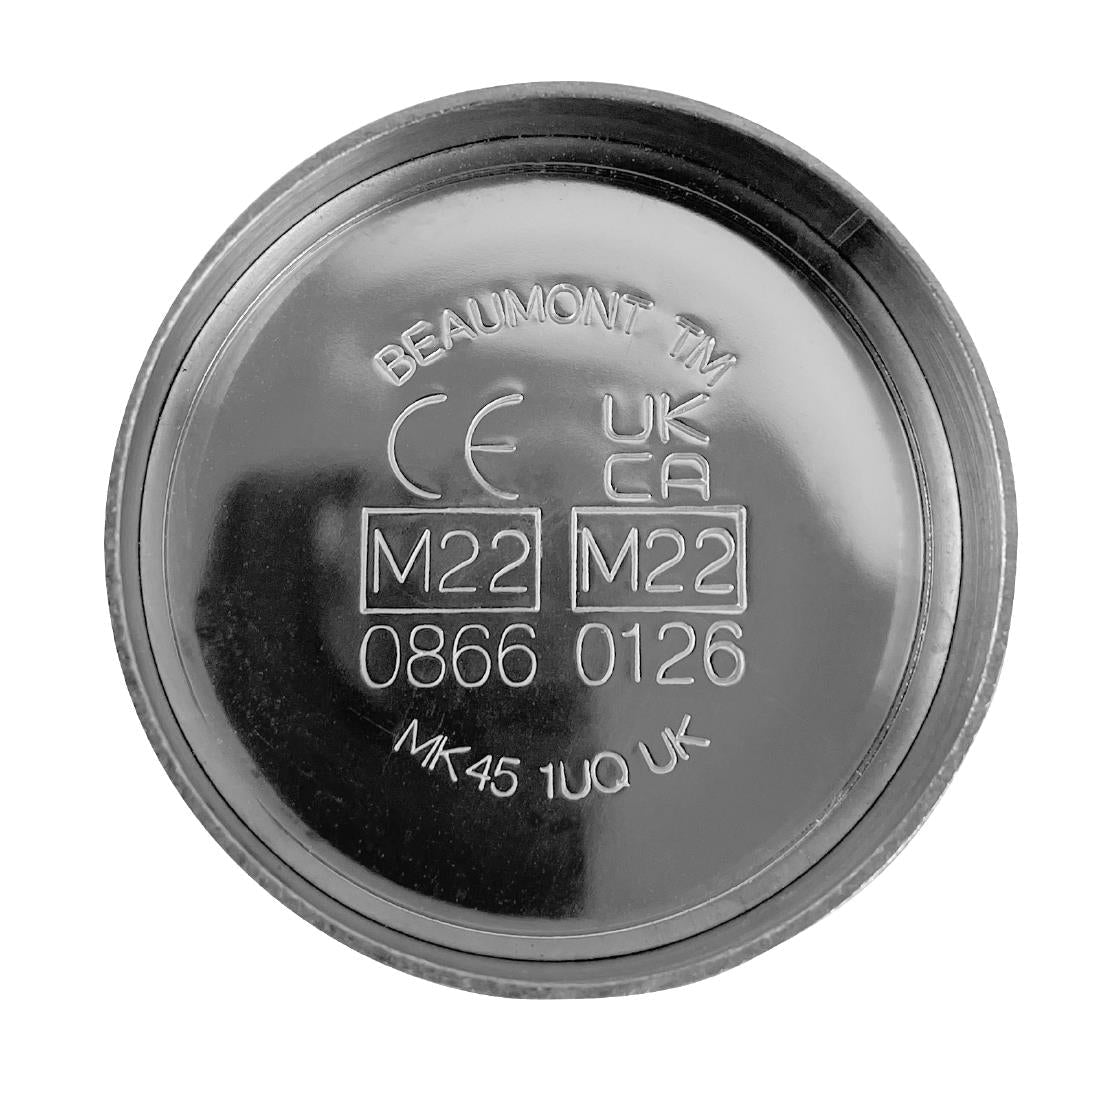 CJ447 Beaumont Stainless Steel Thimble Measure CE Marked 200ml JD Catering Equipment Solutions Ltd